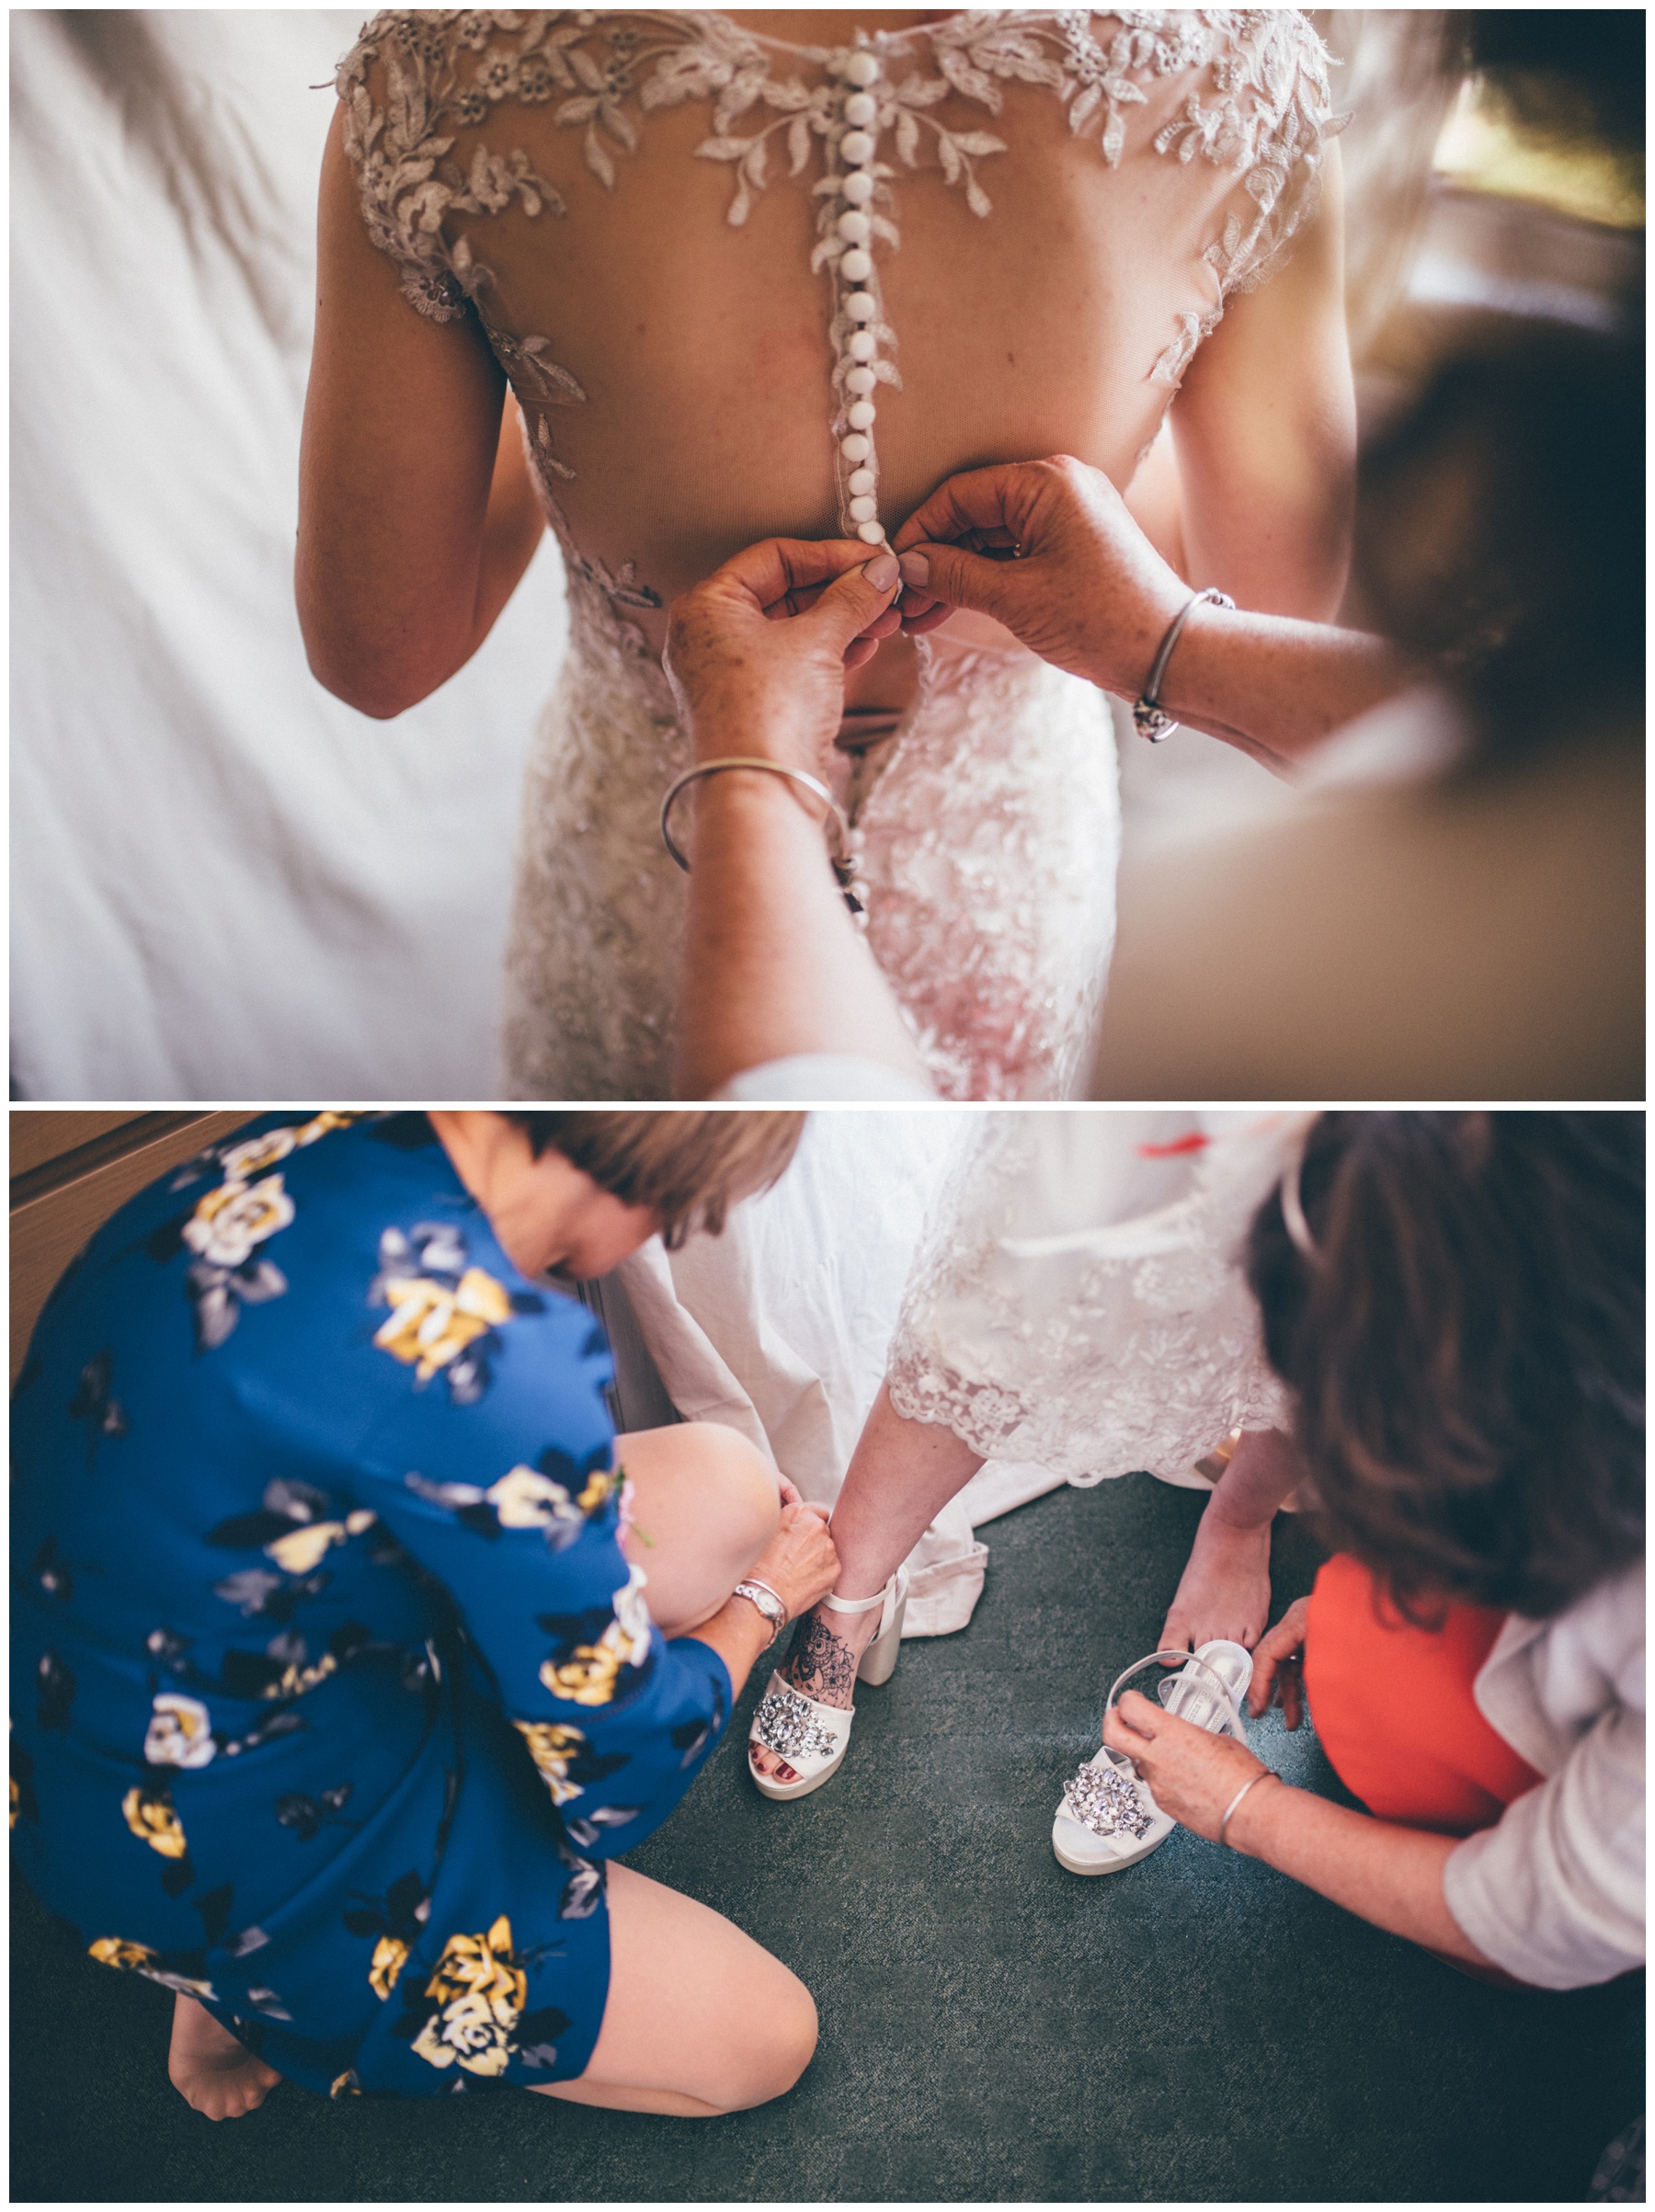 The bride-to-be gets dressed with the help of her mum on her wedding day.